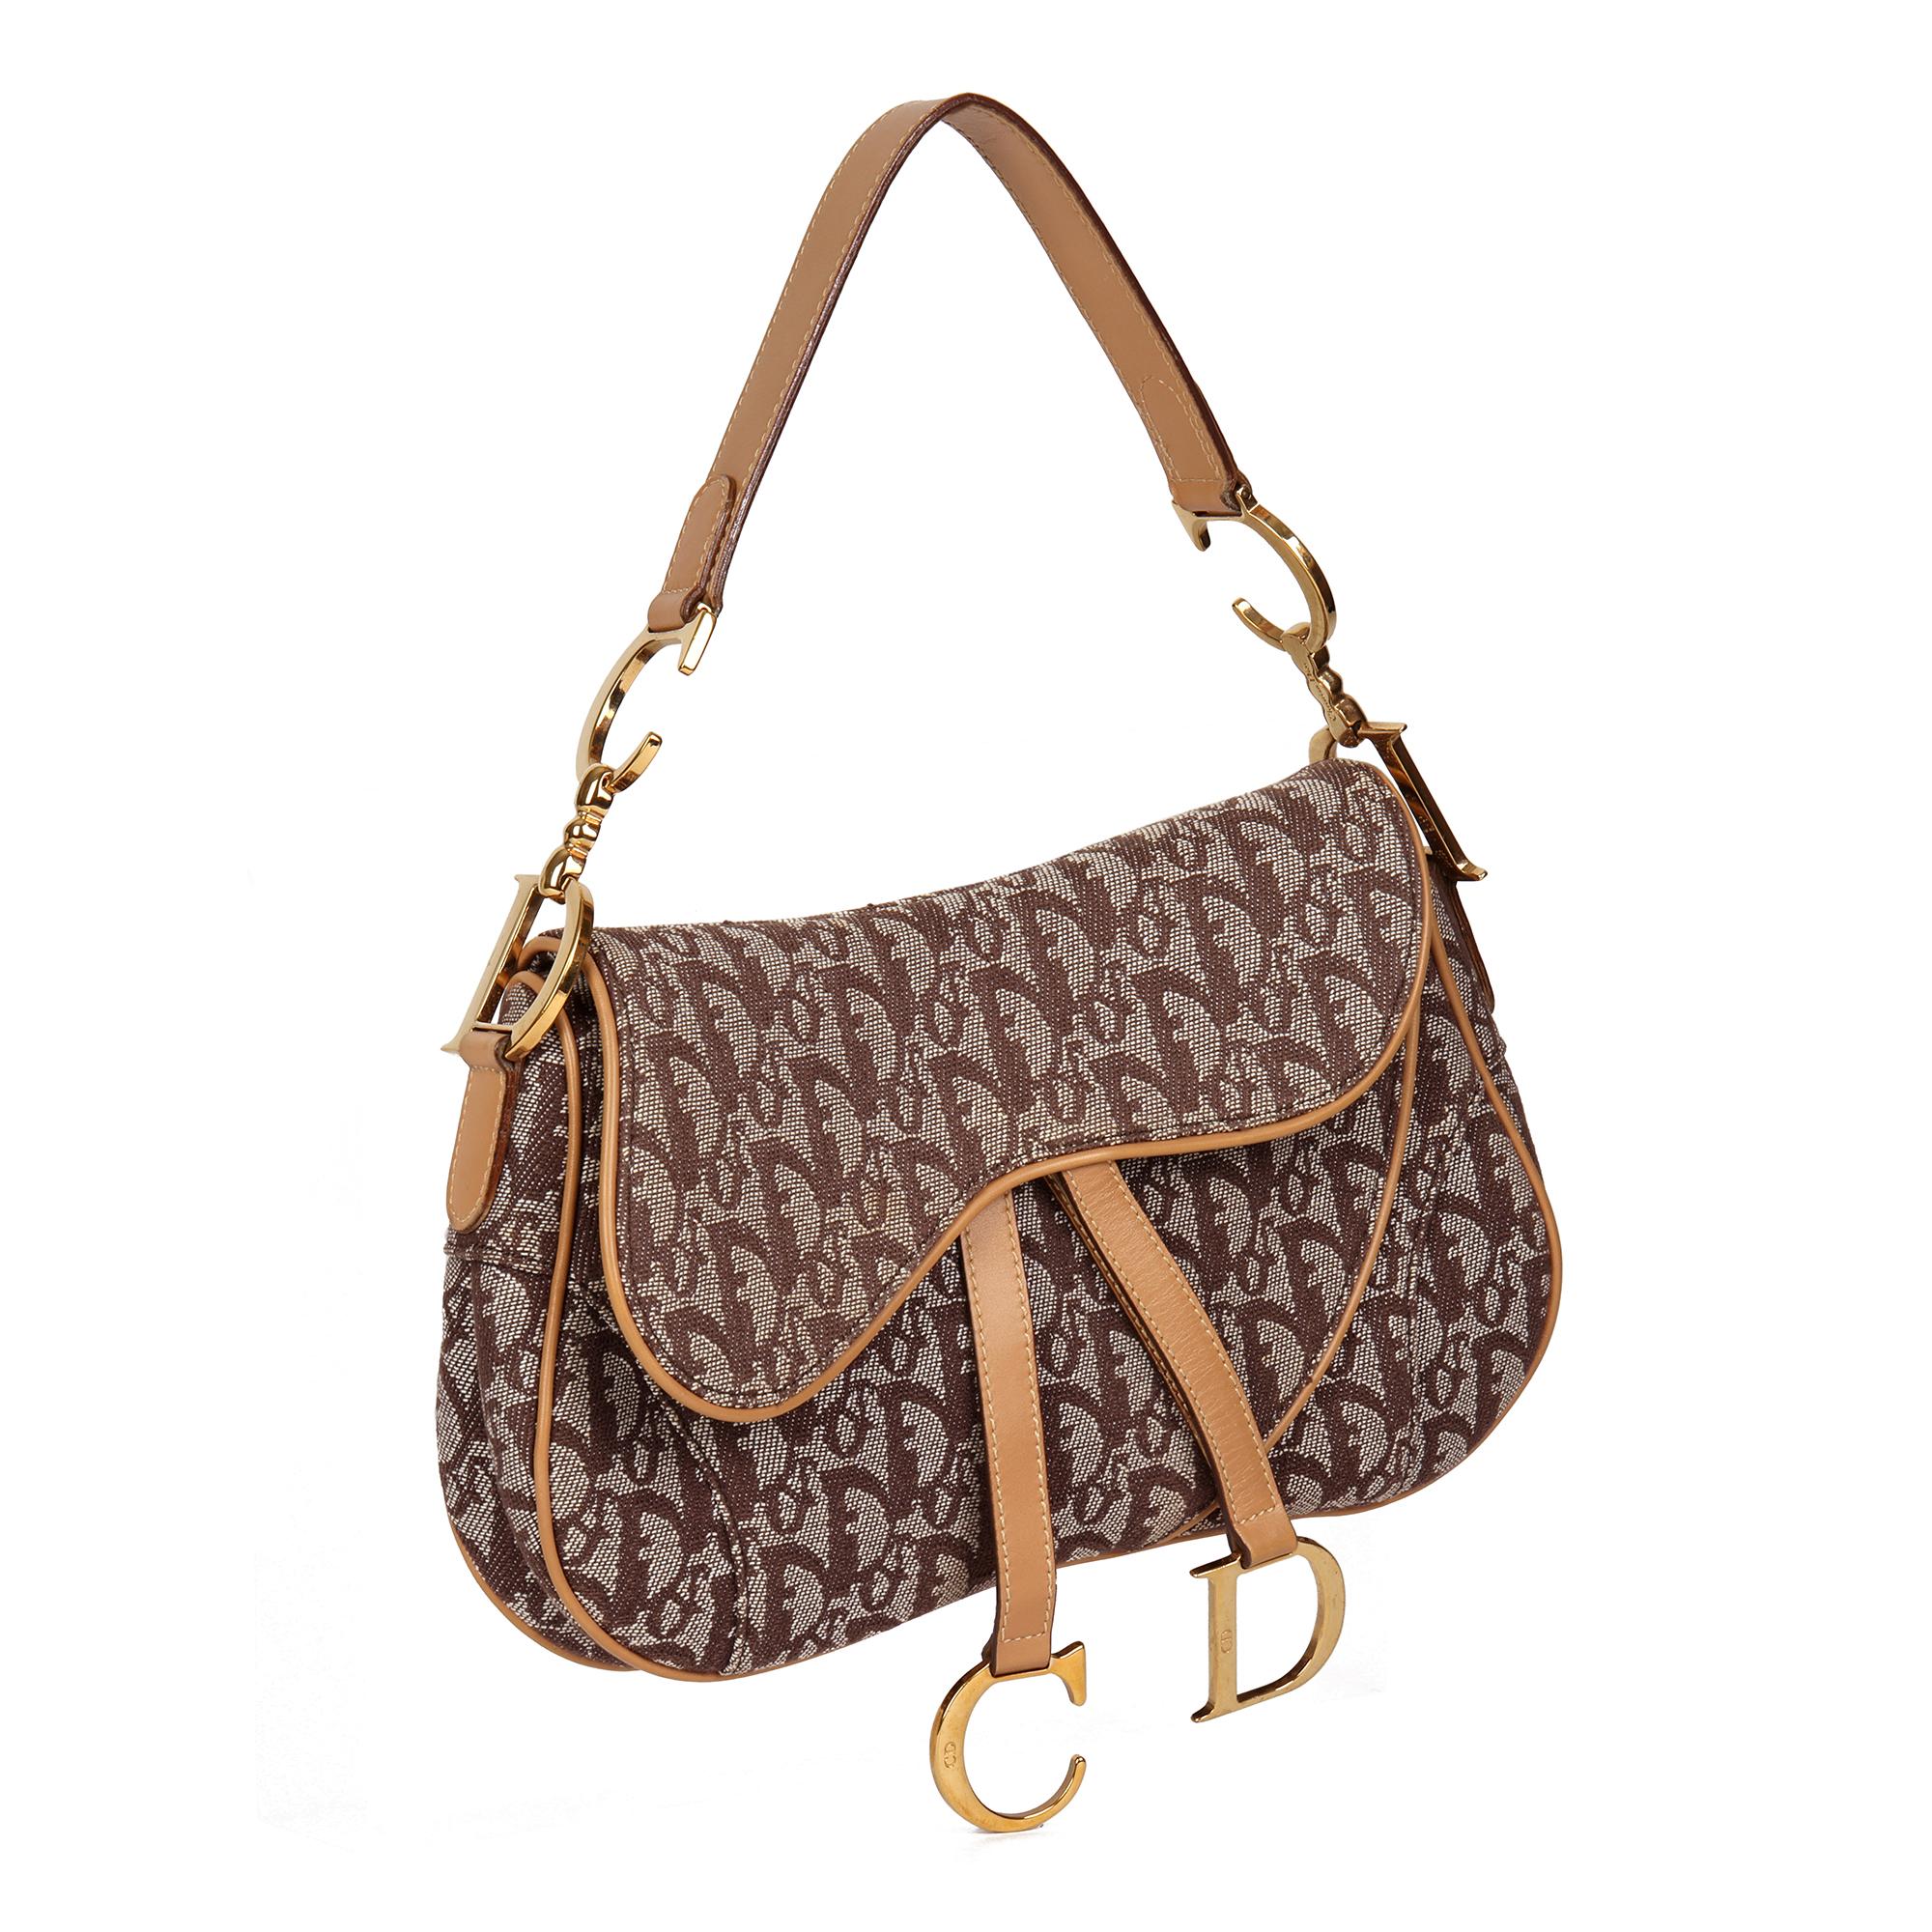 CHRISTIAN DIOR
Brown Monogram Canvas & Calfskin Leather Vintage Double Saddle Bag

Xupes Reference: HB4363
Serial Number: RU 1011
Age (Circa): 2001
Authenticity Details: Date Stamp (Made in Italy)
Gender: Ladies
Type: Shoulder, Top Handle

Colour: